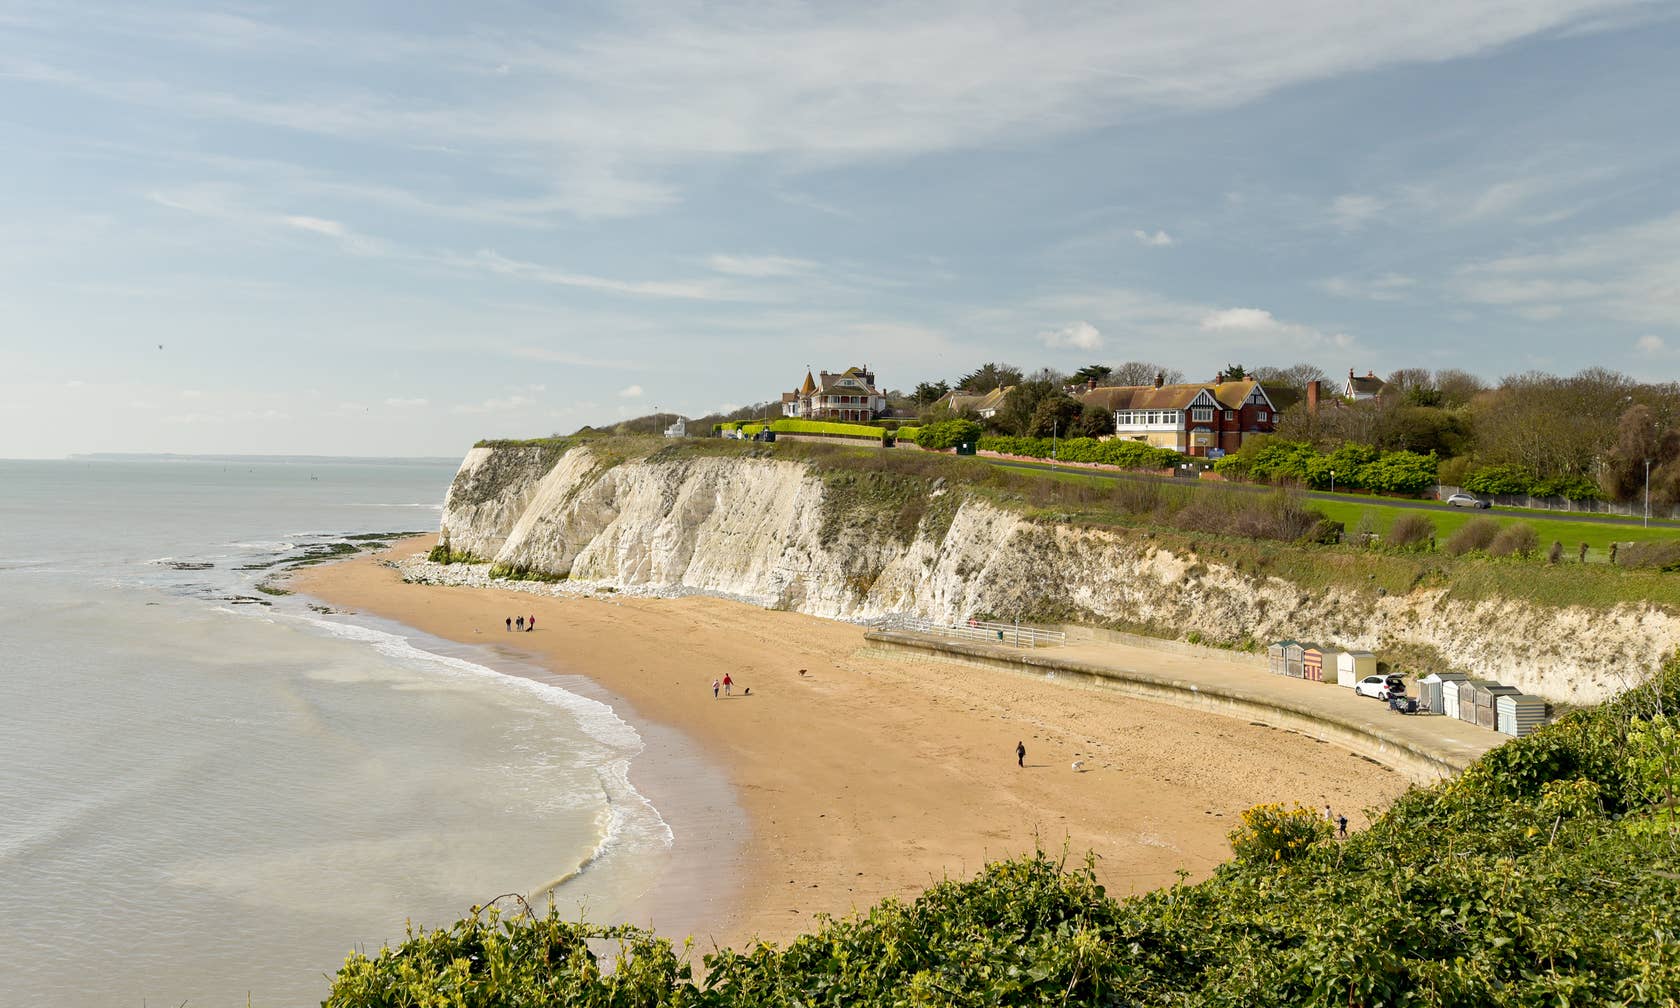 Holiday rental houses in Broadstairs